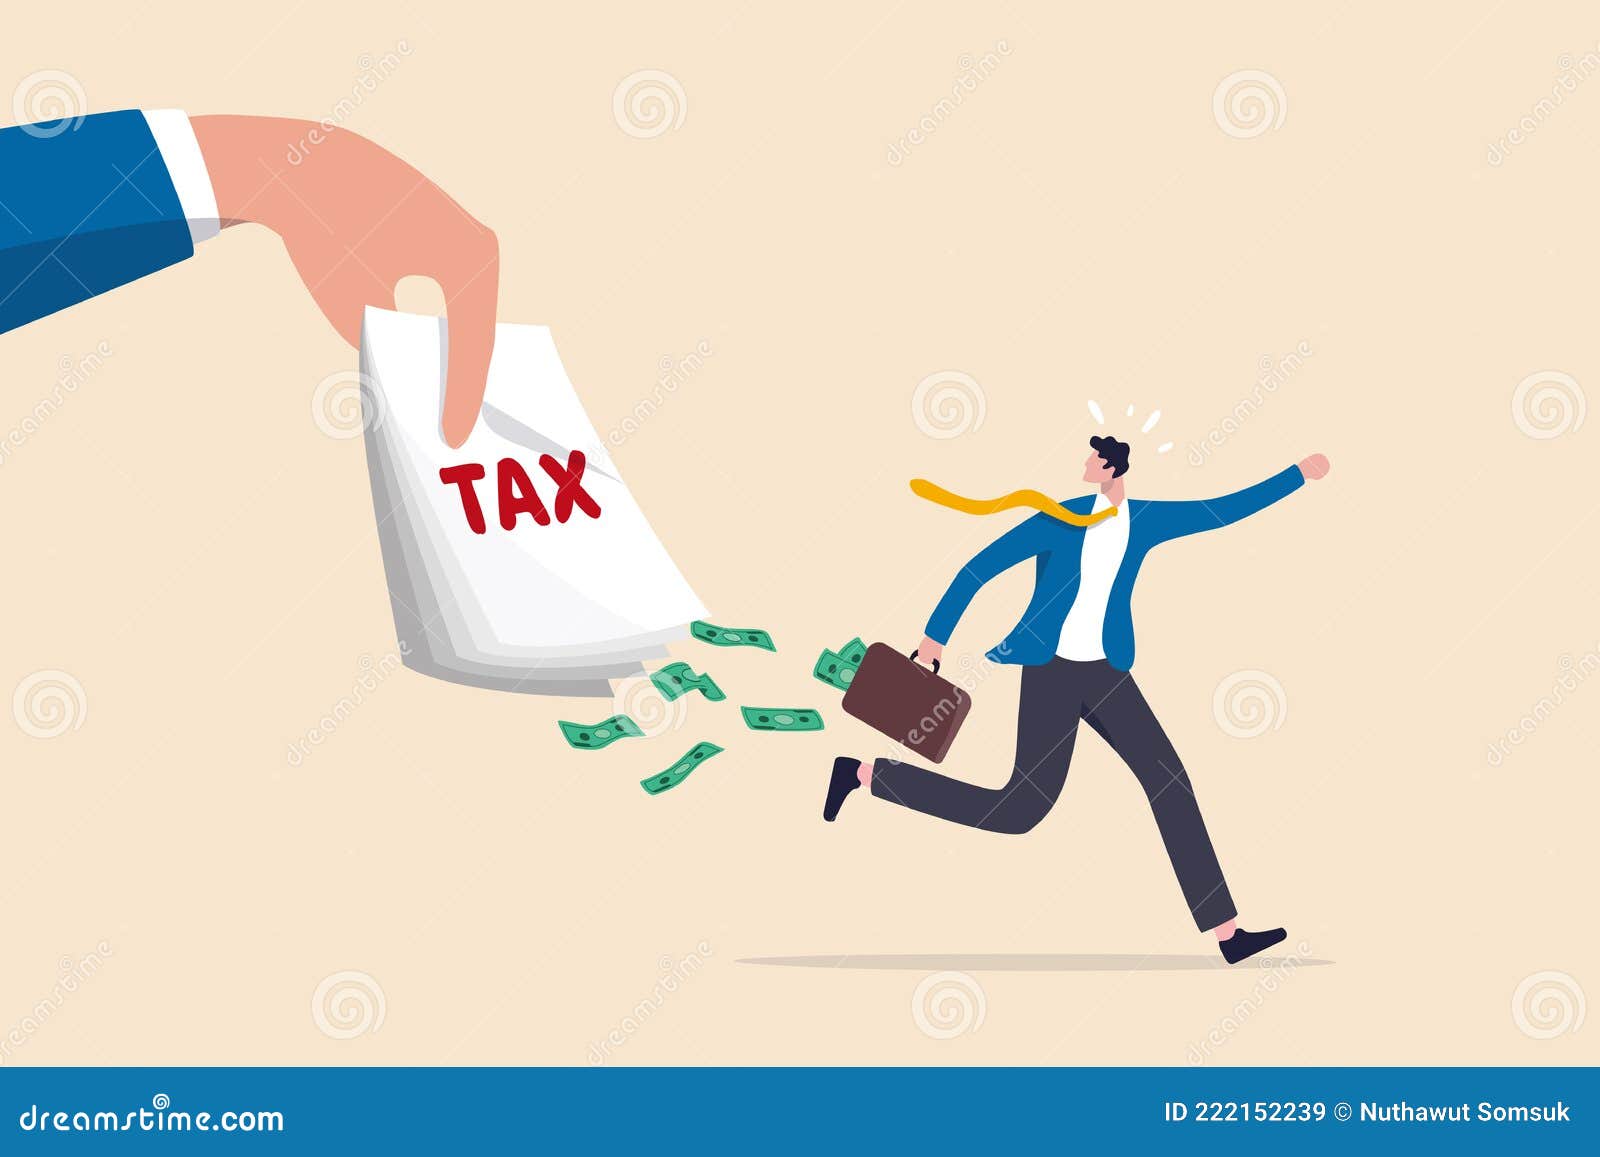 tax evasion, illegal hide revenue and avoid paying government tax, fraud and money laundering or financial crime concept,